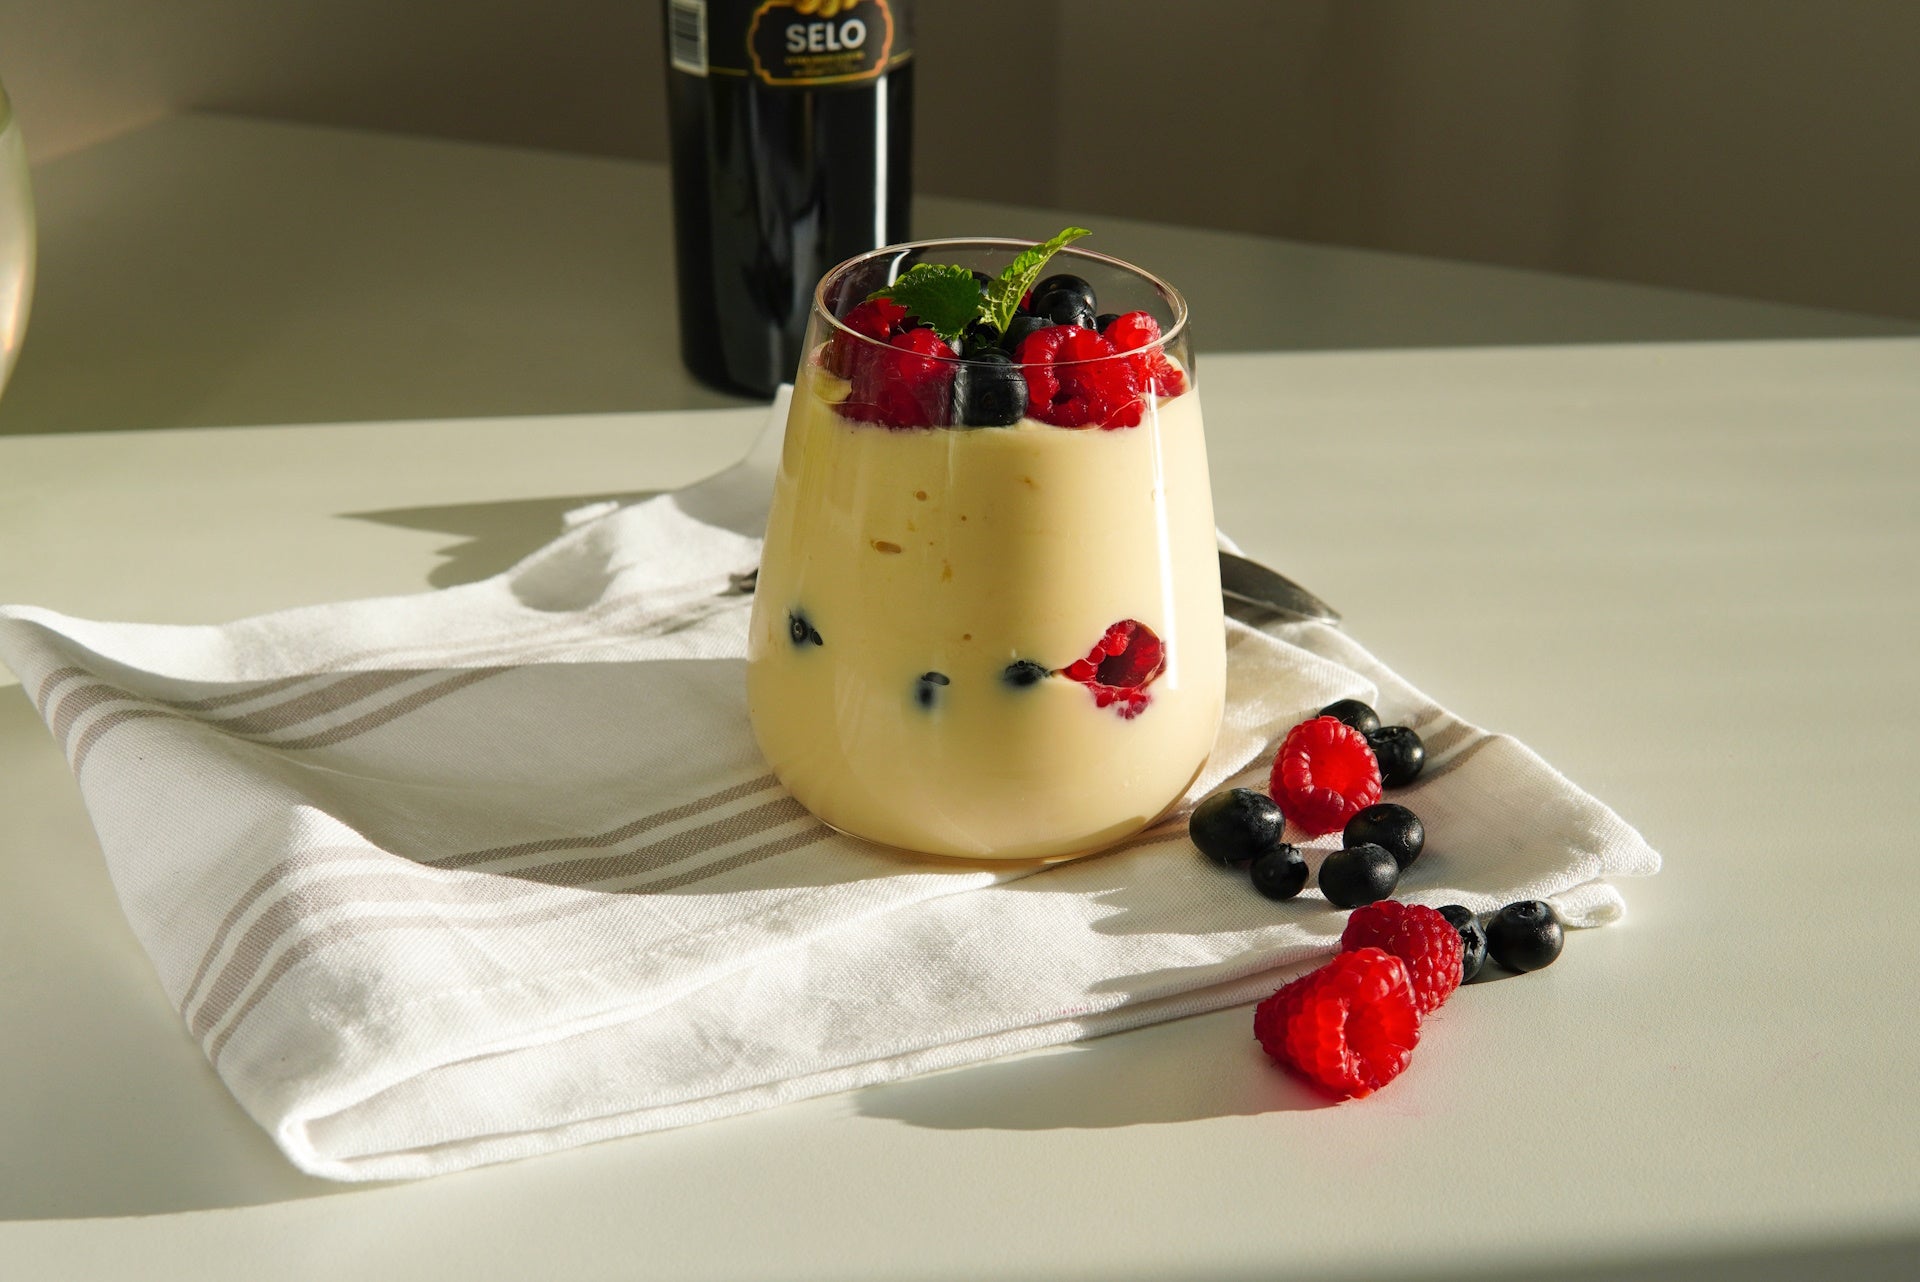 Creamy Greek yoghurt topped with fresh fruit, enhanced with a dash of Croatian olive oil.